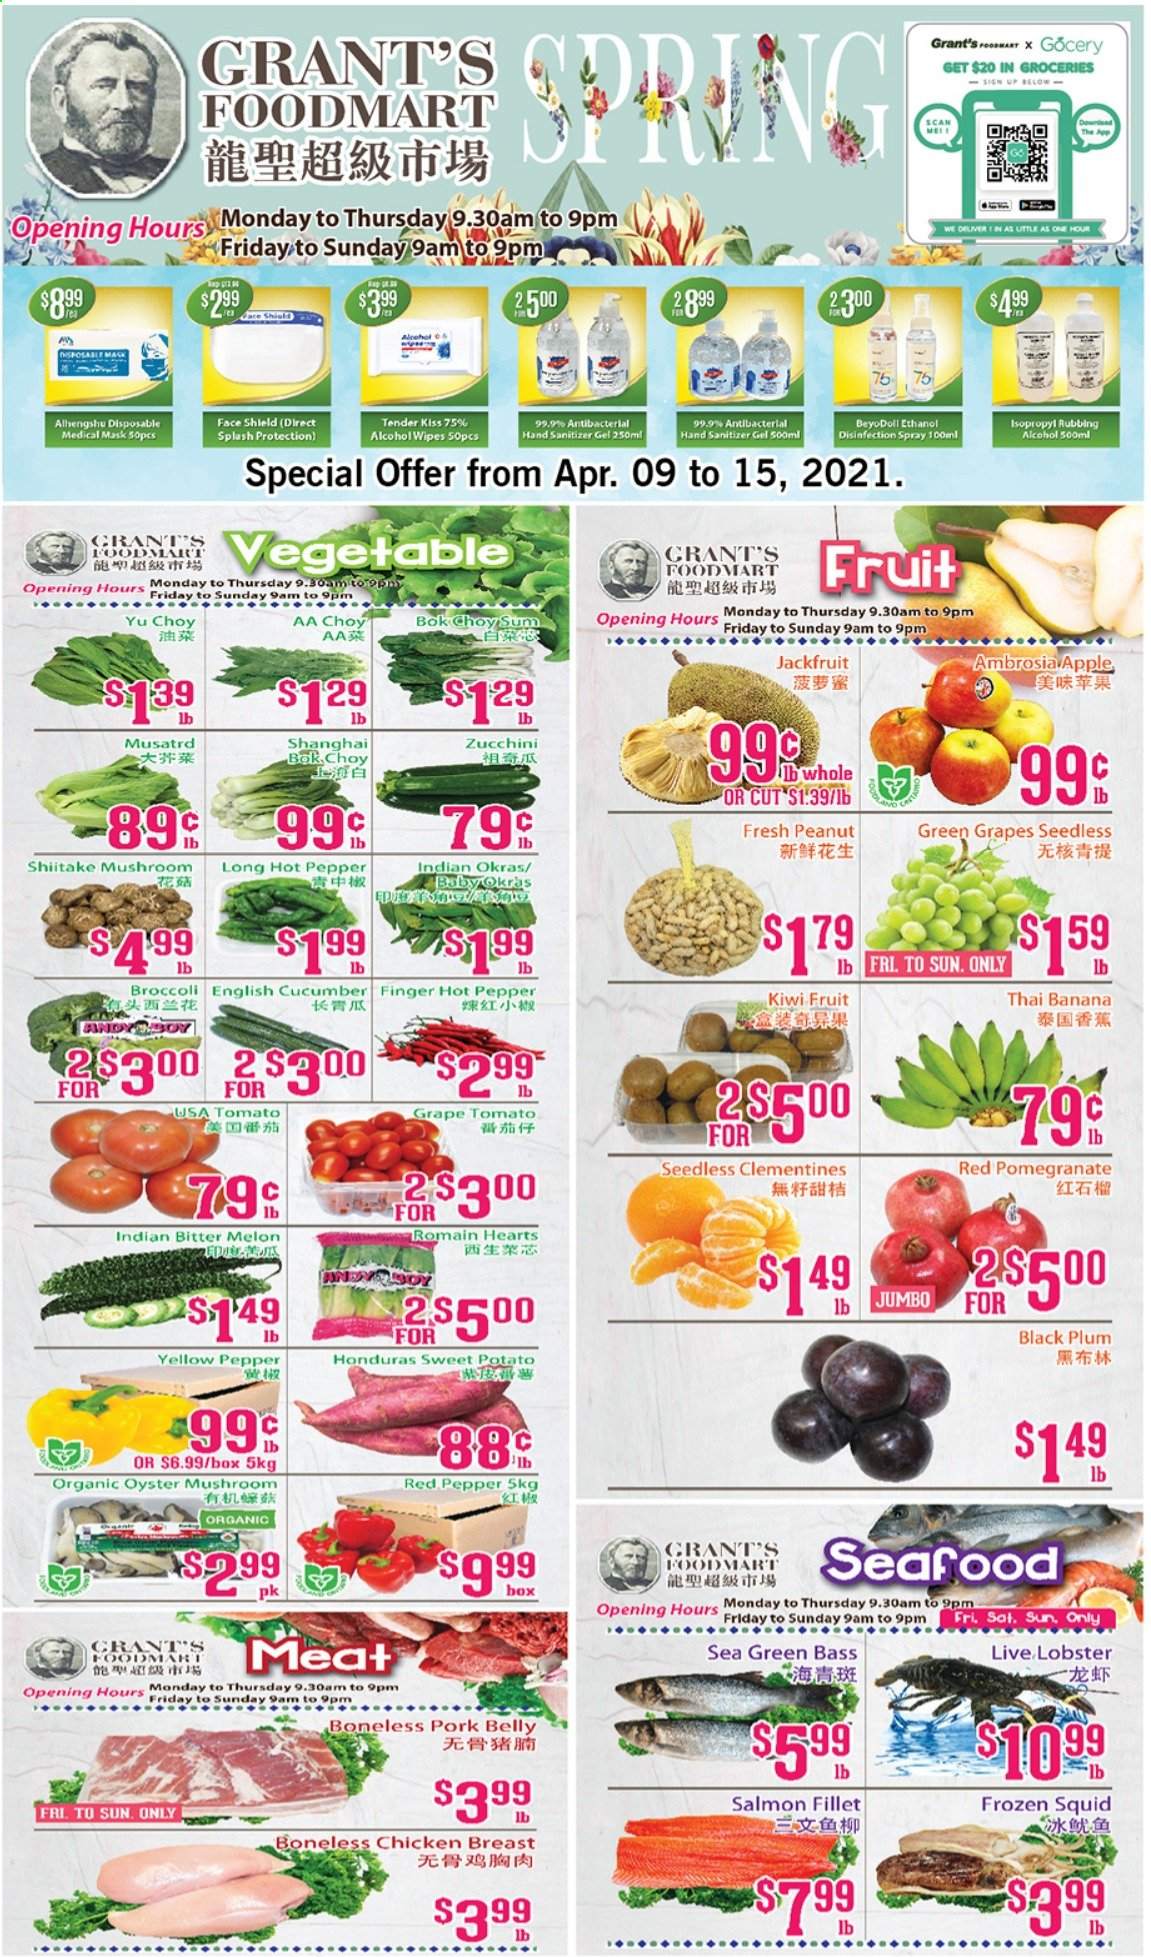 thumbnail - Grant's Foodmart Flyer - April 09, 2021 - April 15, 2021 - Sales products - oyster mushrooms, mushrooms, bok choy, broccoli, sweet potato, zucchini, lettuce, clementines, melons, pomegranate, black plums, lobster, salmon, salmon fillet, squid, oysters, Grant's, chicken breasts, chicken, pork belly, pork meat, hand sanitizer, kiwi. Page 1.